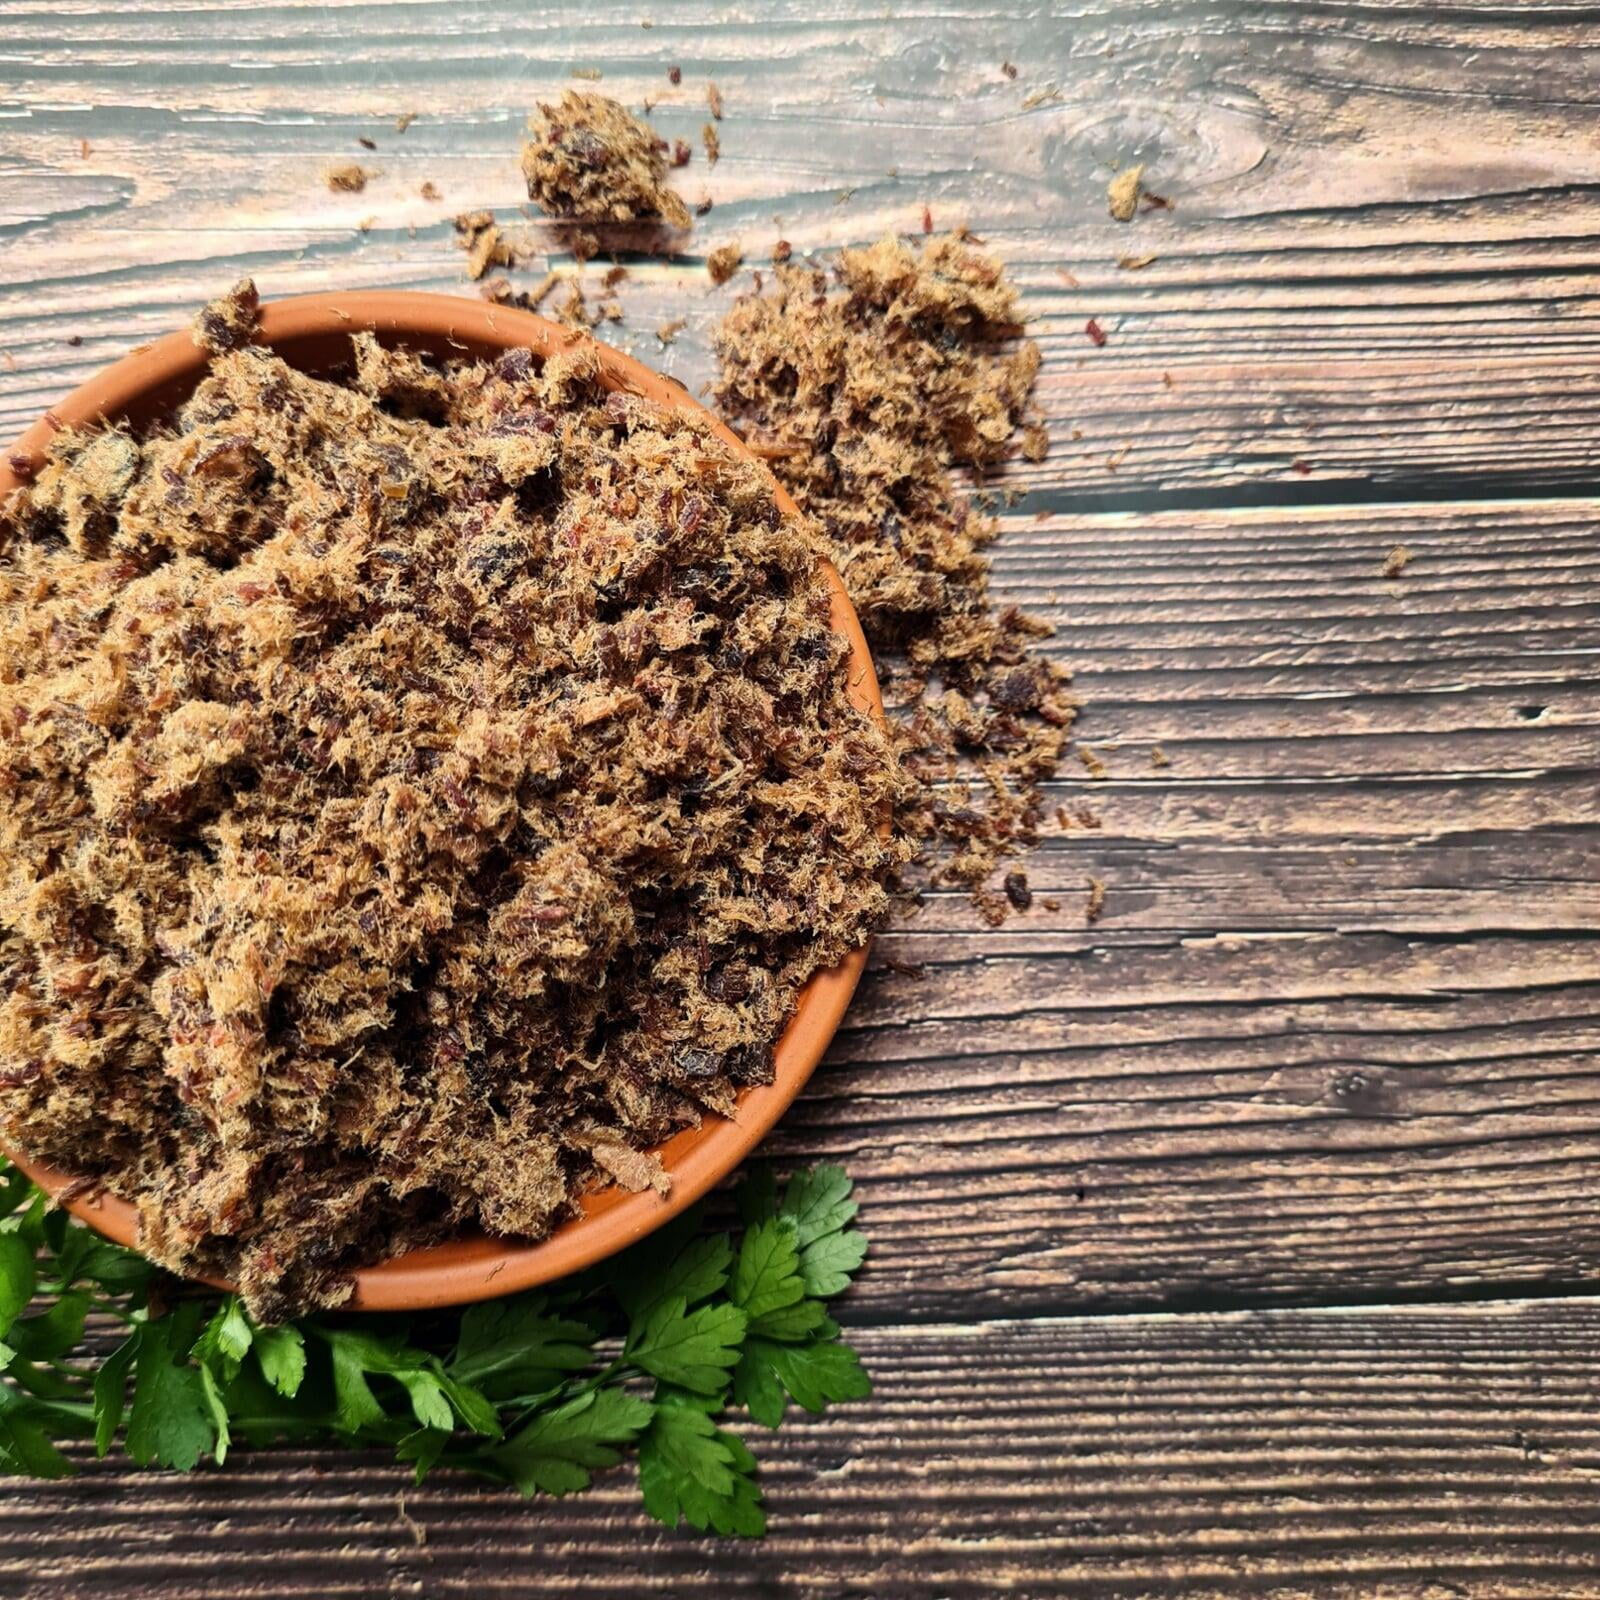 Biltong Powder: Adding Flavor and Protein to Your Dishes